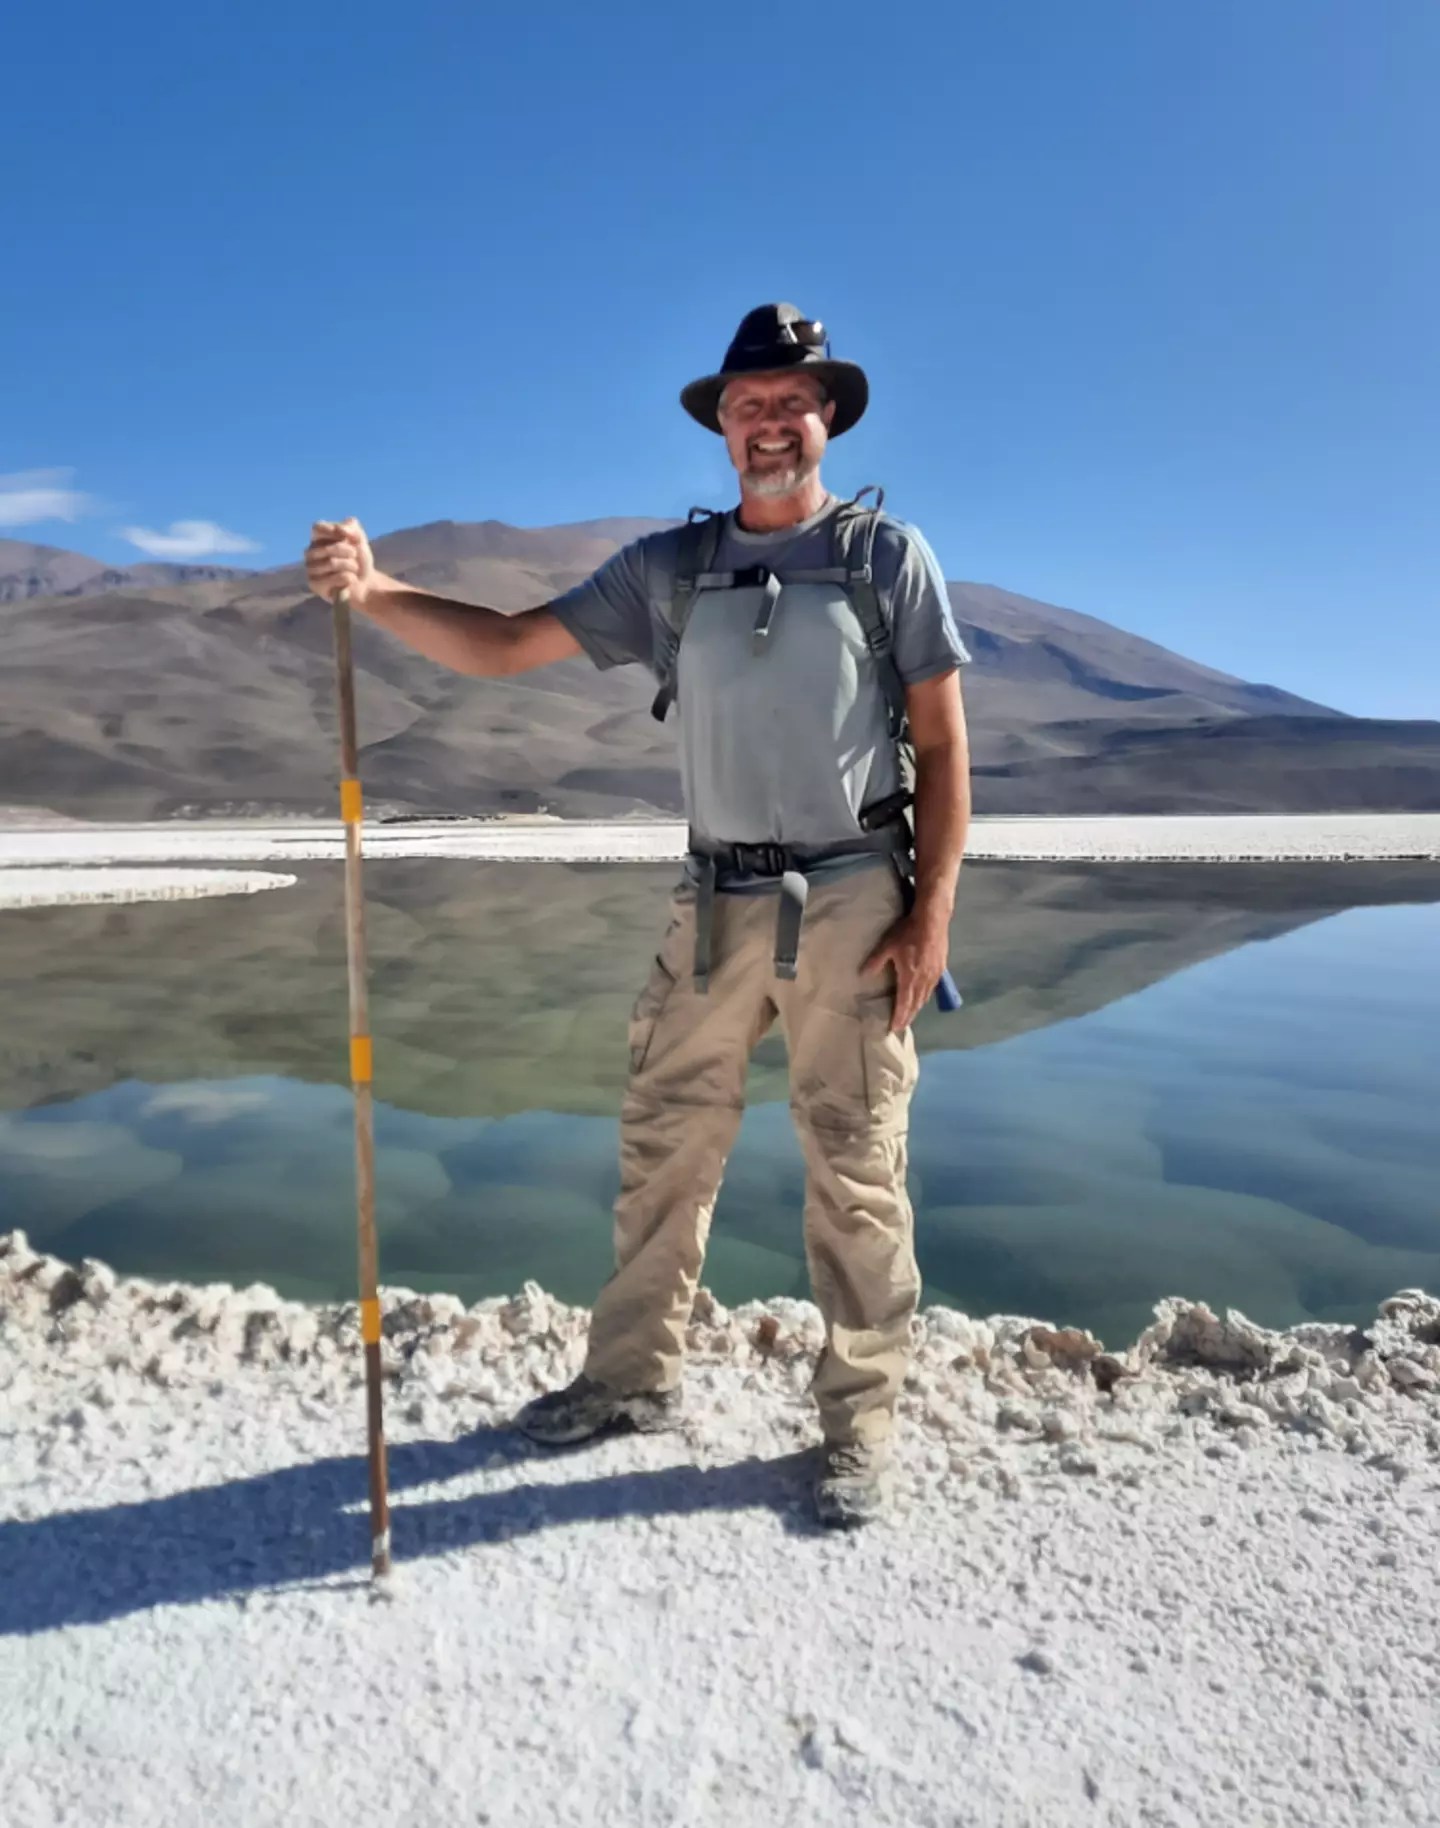 Geologist Brian Hynek found the lagoon filled with green mounds of stromatolites.